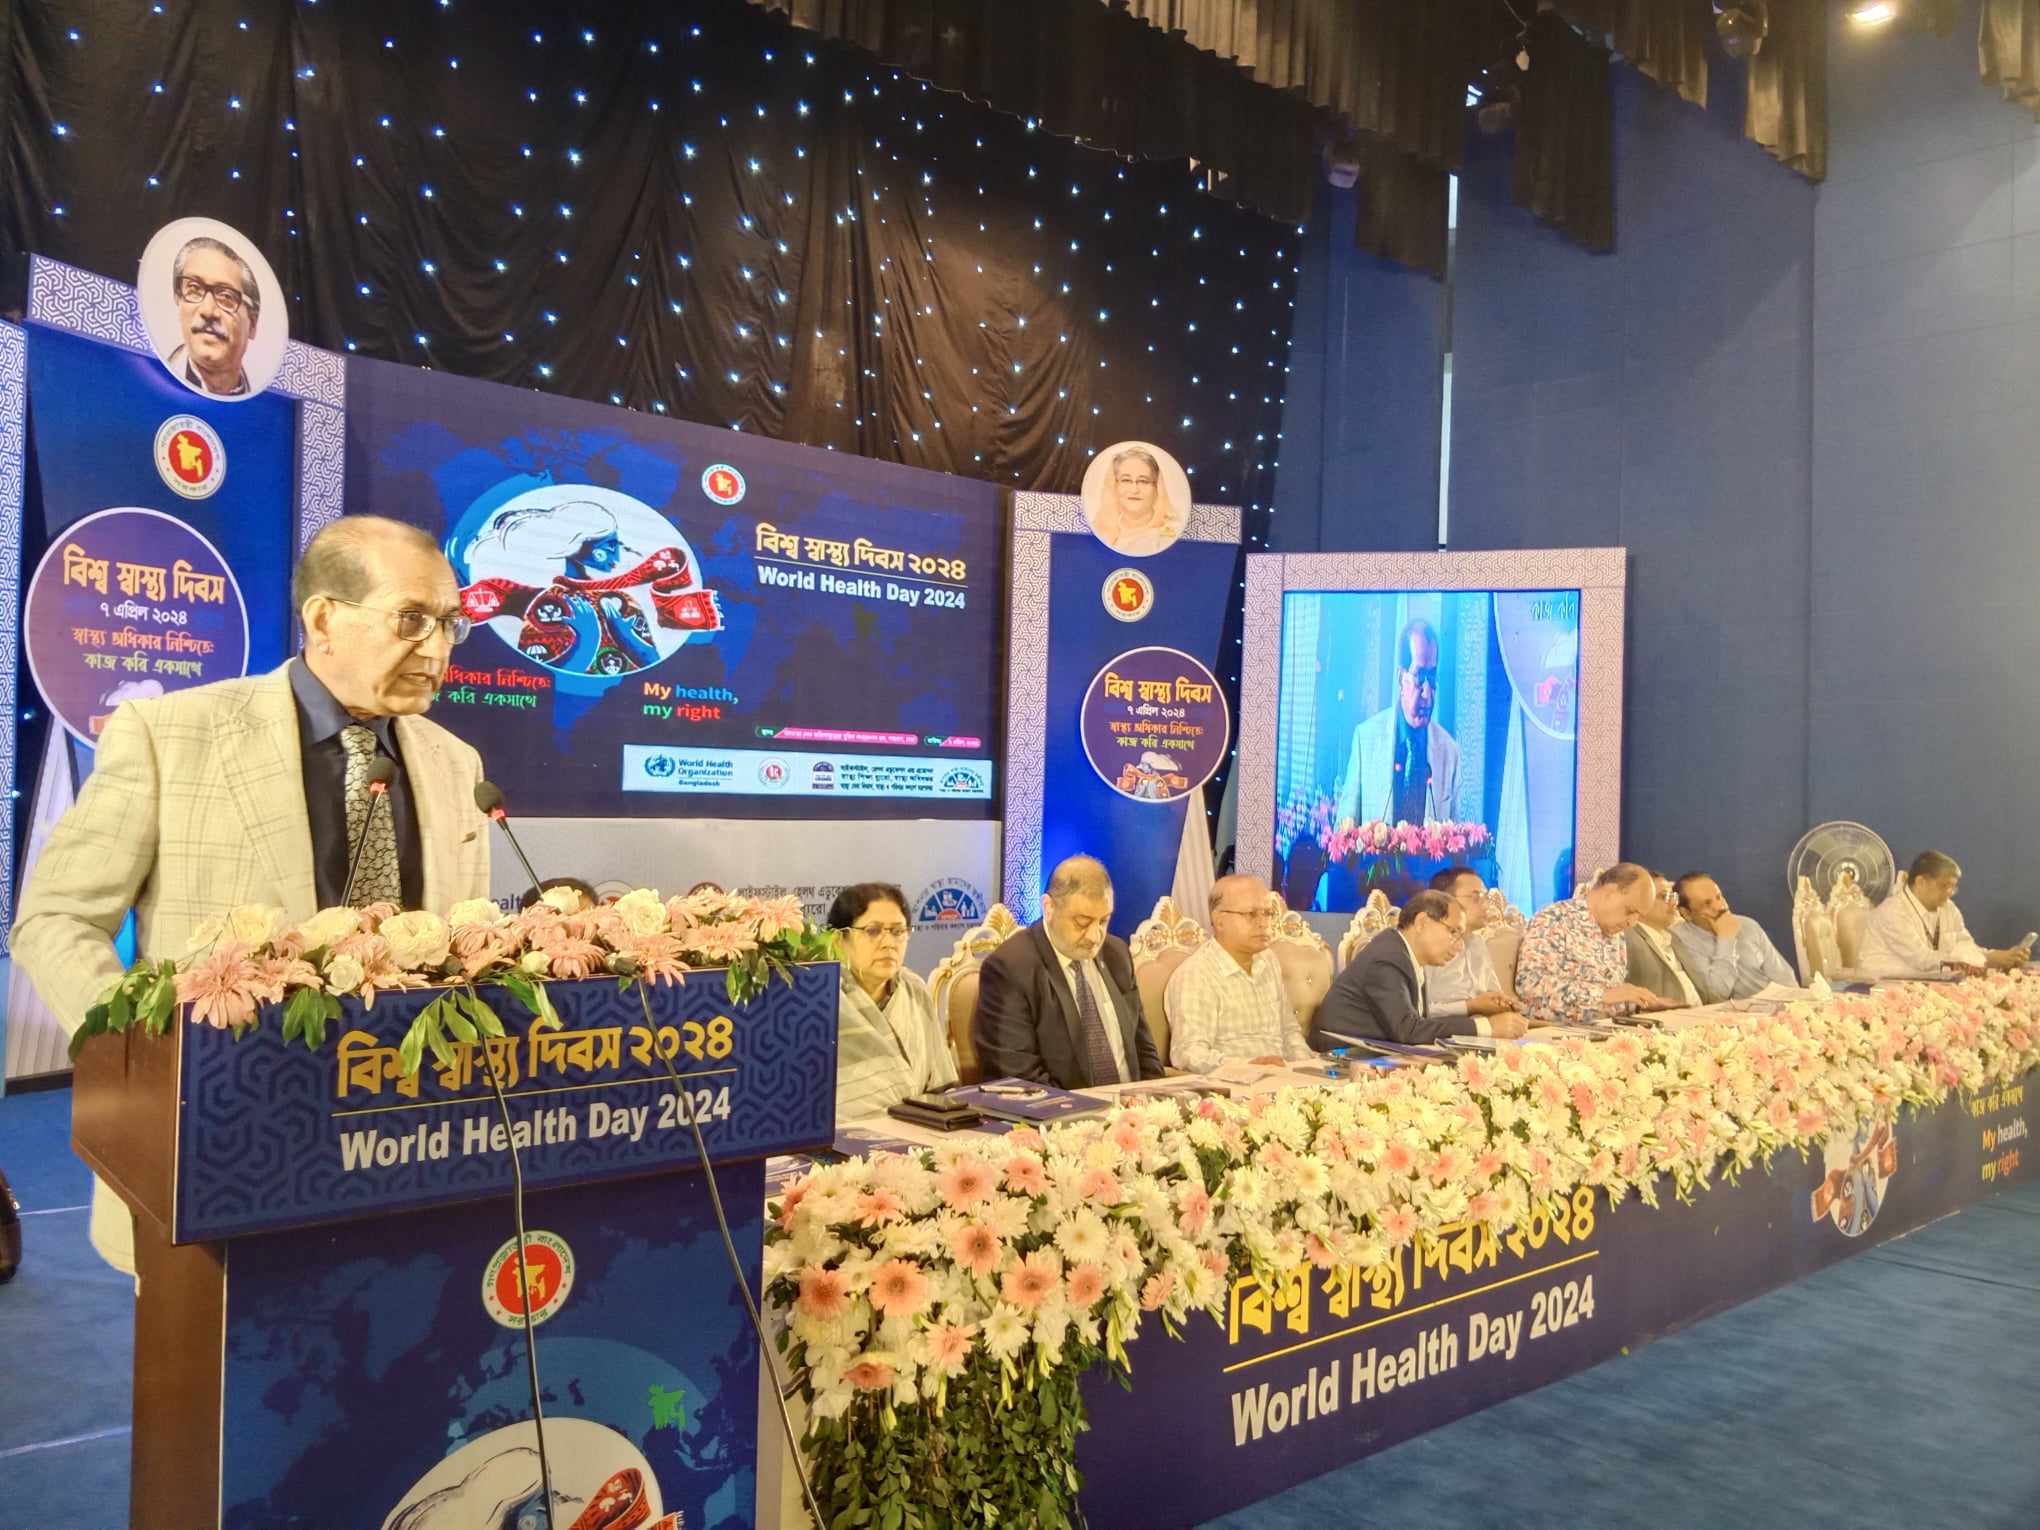 World Health Day 2024 was held at BSMMU